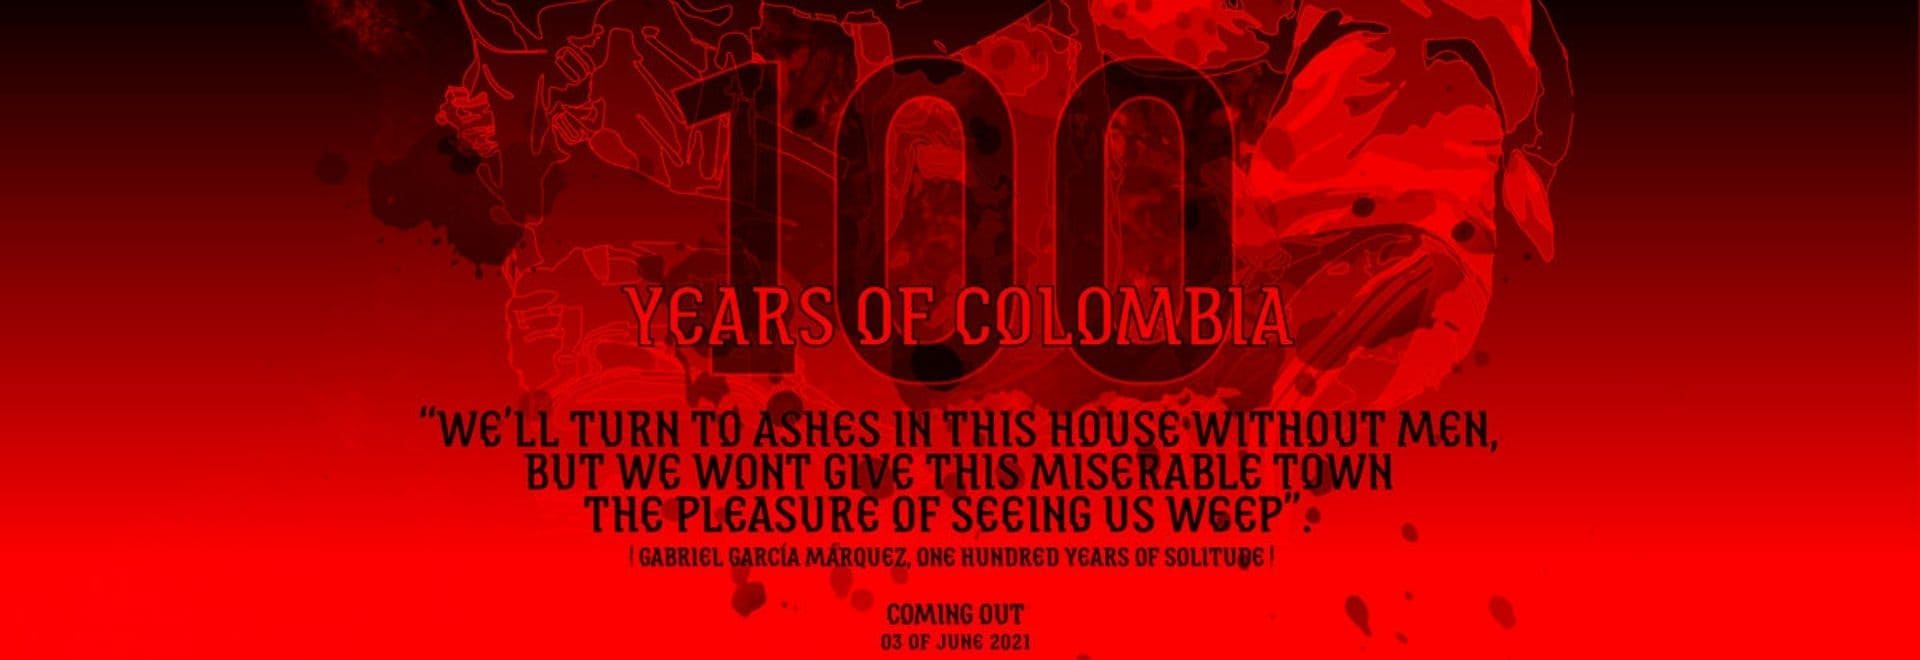 px099 100 years of colombia